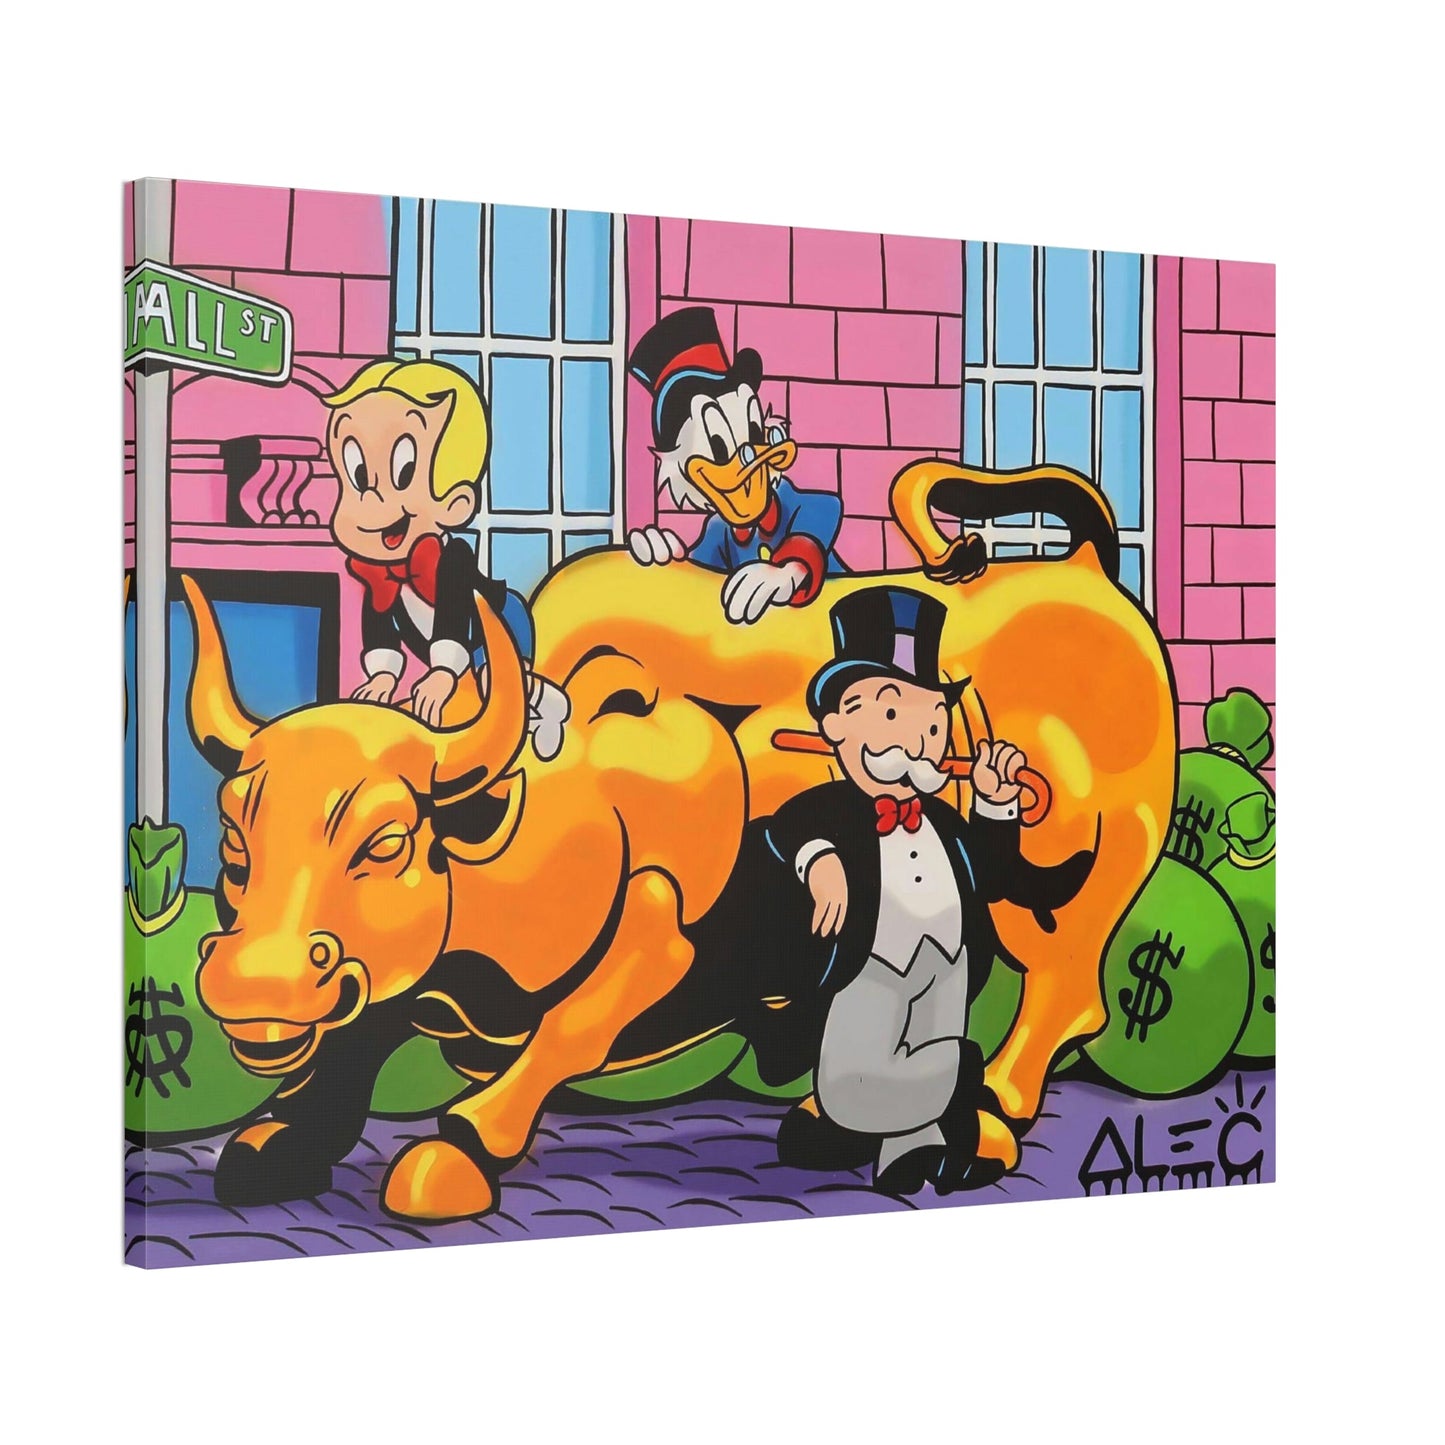 Urban Art with a Twist: Alec Monopoly's Framed Canvas & Poster Prints